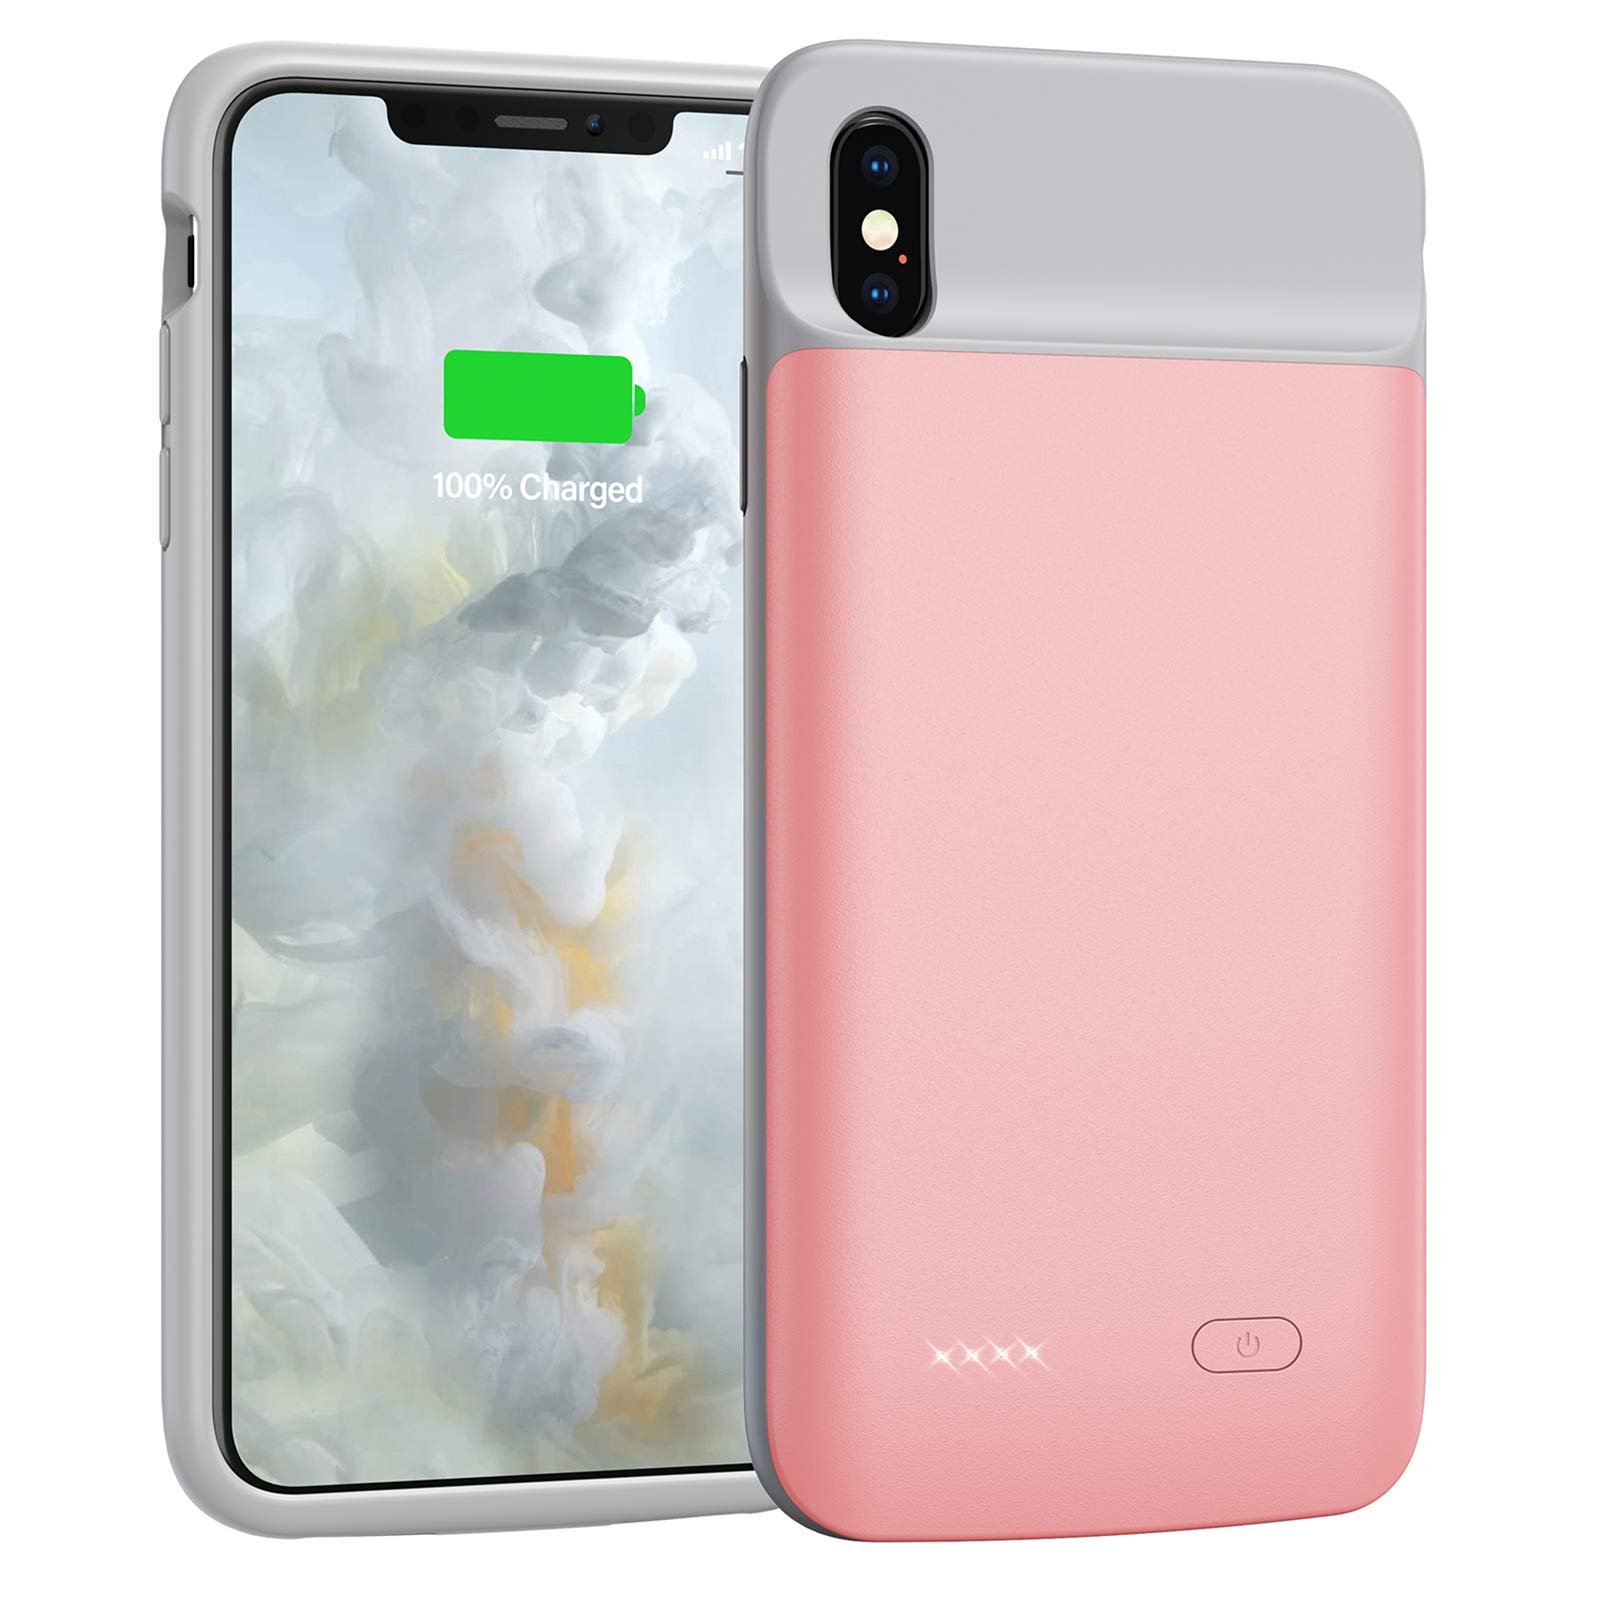 Book Cover Swaller Battery Case for iPhone X/Xs, 4100mAh Portable Protective Charging Case Extended Rechargeable Battery Pack Cover Charger Case for iPhone X/Xs (5.8 Inch) Pink Rose Gold